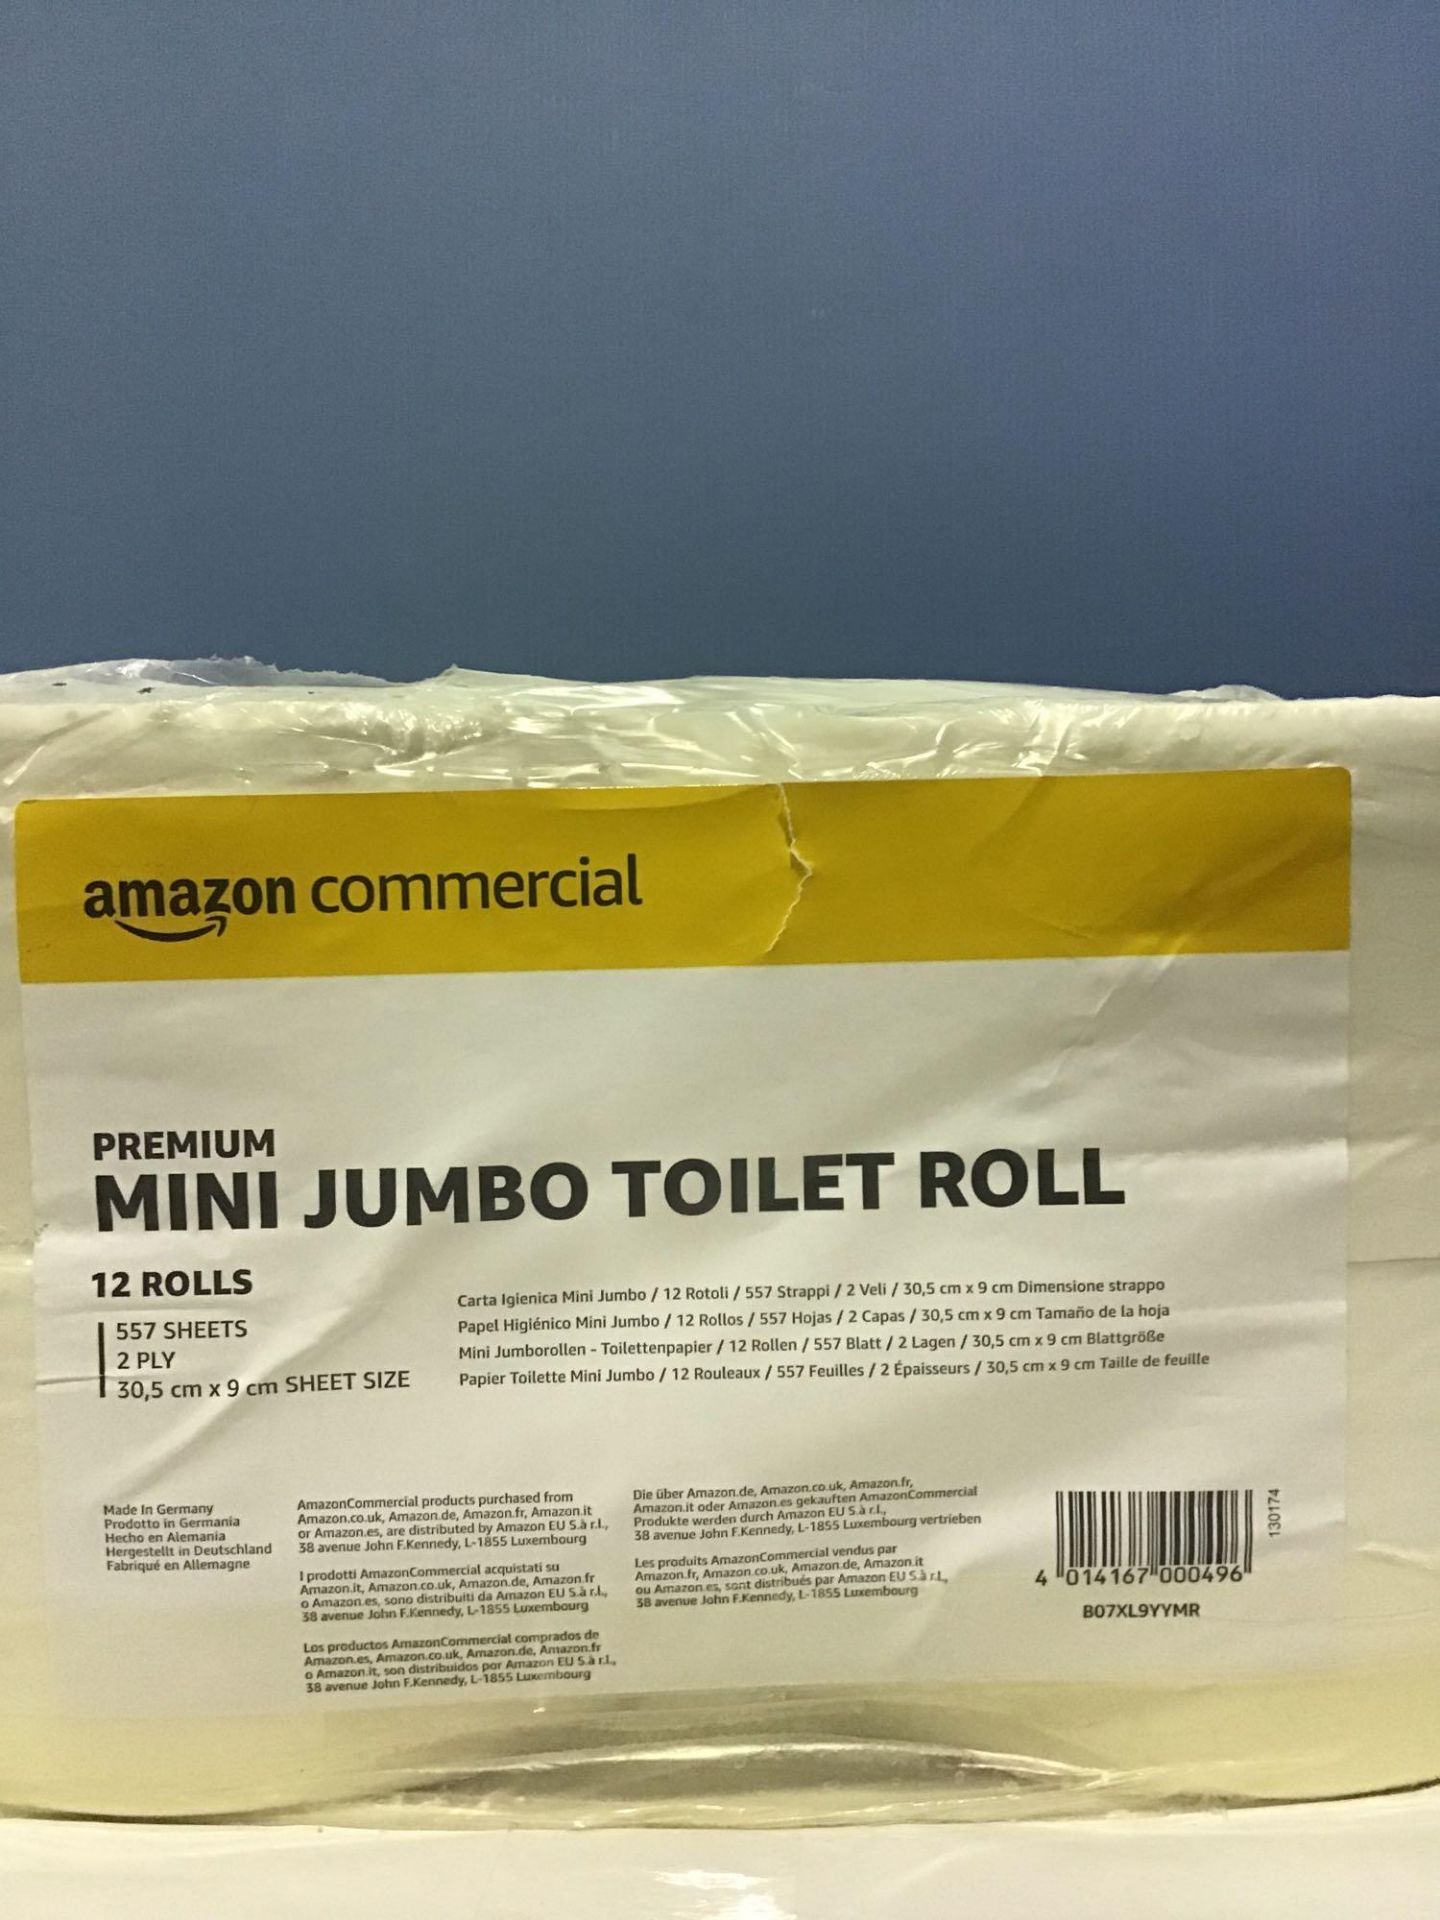 Amazon Commercial Mini Jumbo Toilet Roll 2 PLY Pack of 12 Rolls (557 Sheets/Roll)(416647) £15.99 RRP - Image 3 of 6